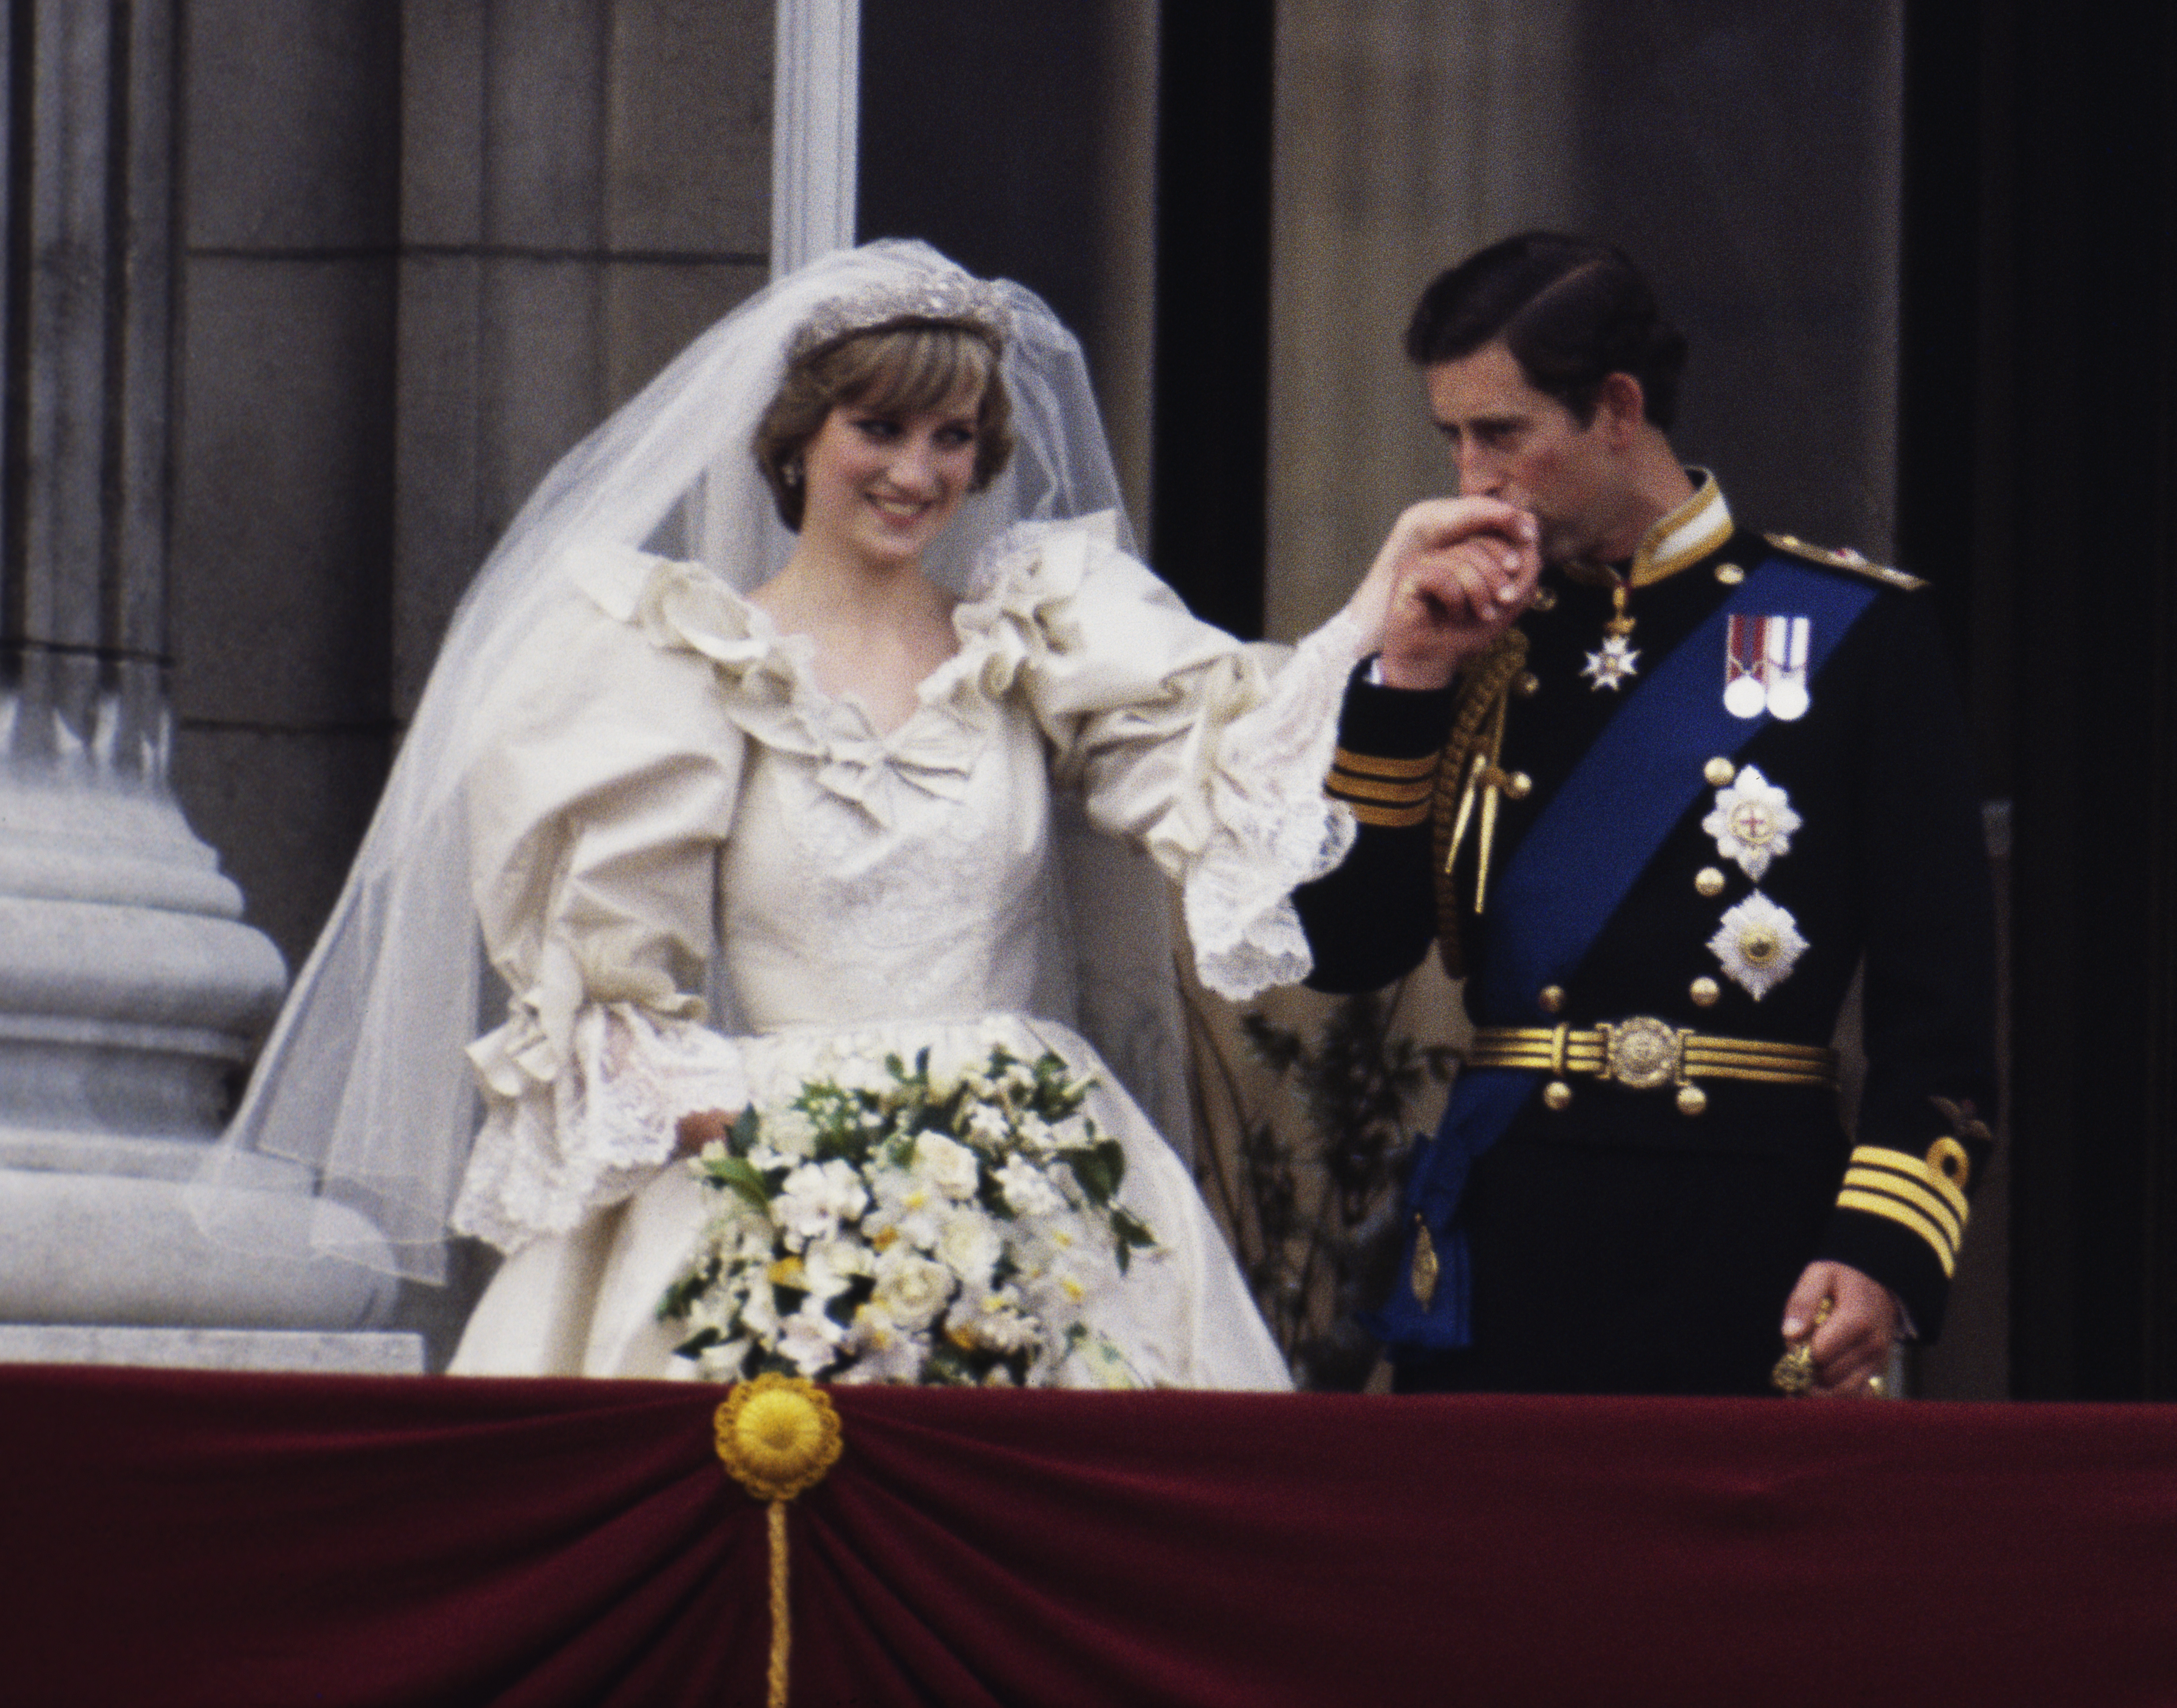 Princess Diana and Prince Charles on the balcony of Buckingham Palace on their wedding day, on July 29, 1981. | Source: Getty Images